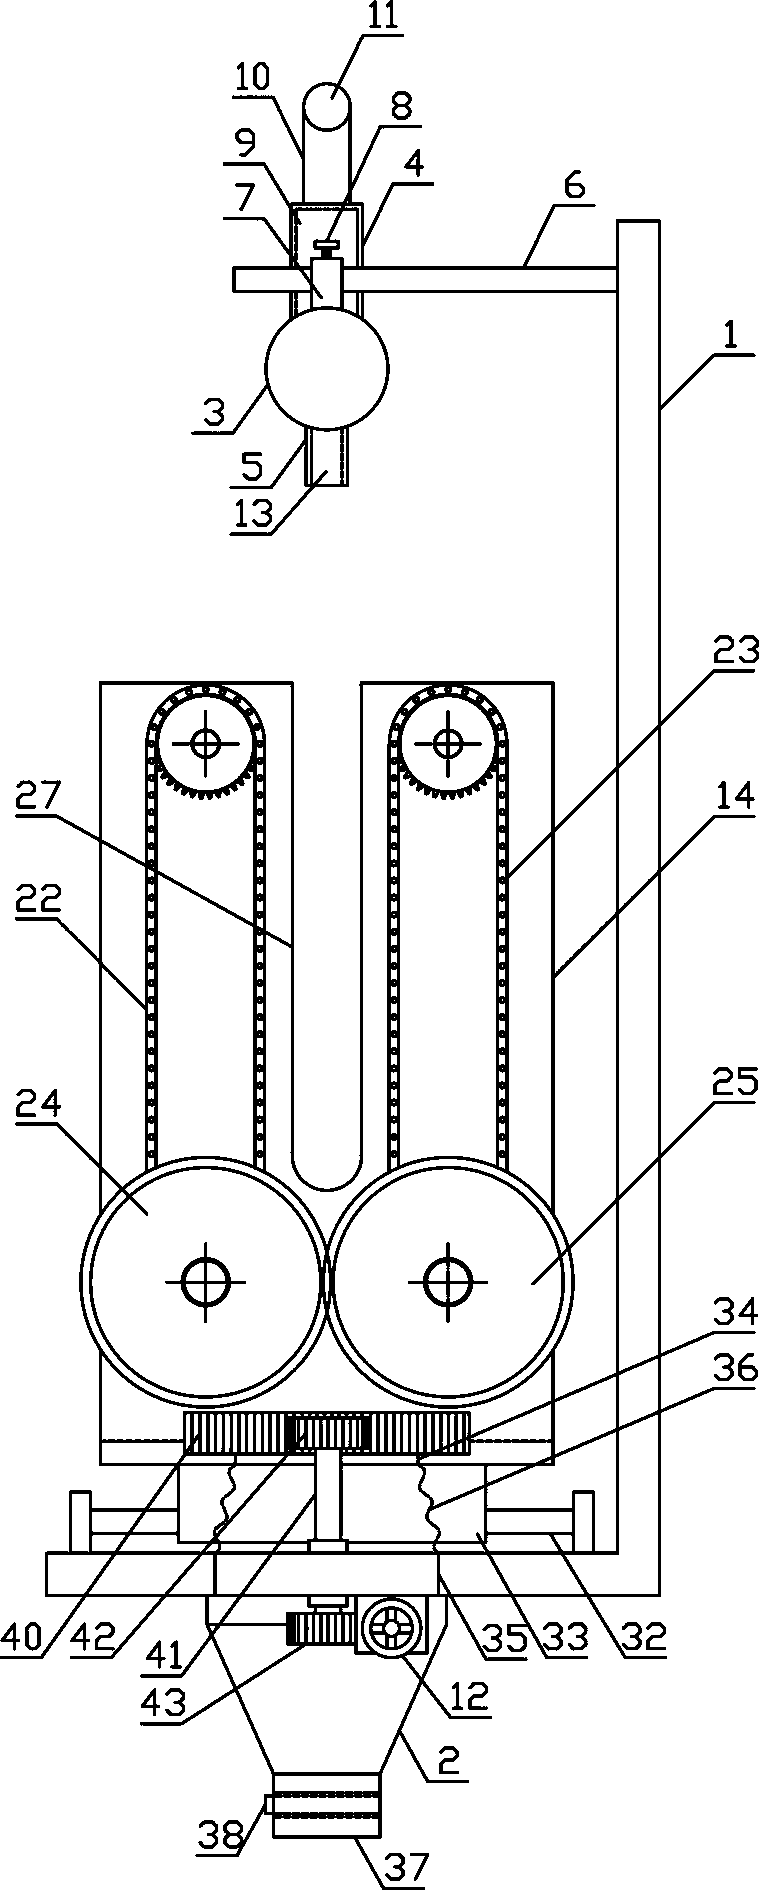 Continuous sectional flax carding mechanism